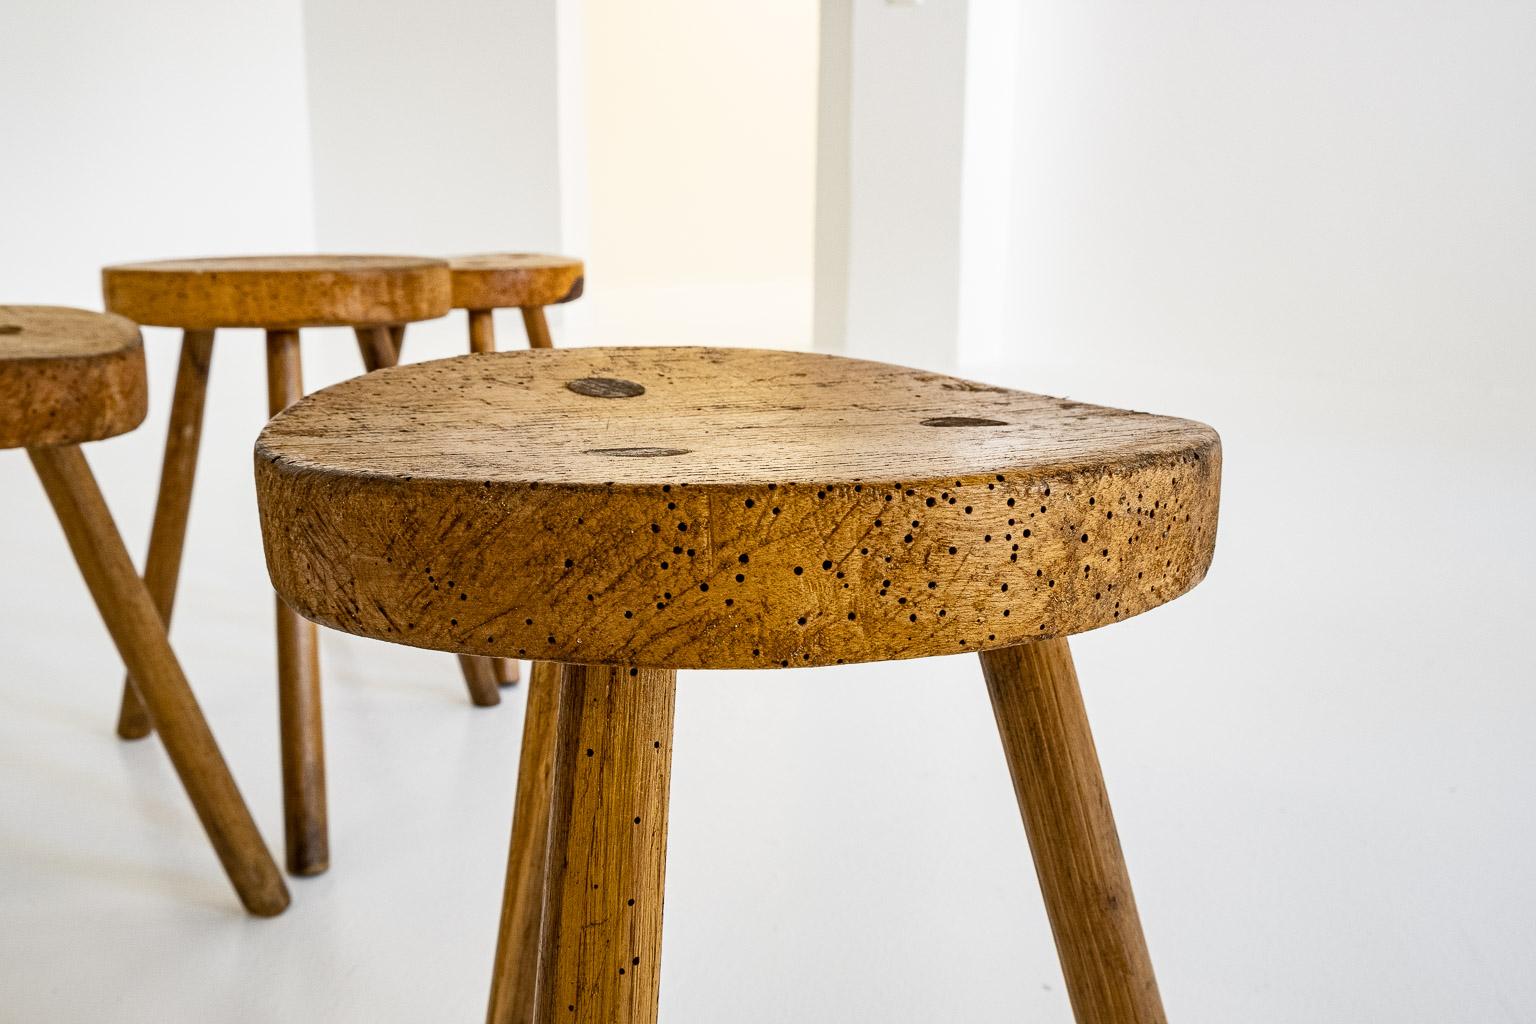 Set of 6, Wooden, Brutalist Tripod Stools or Side Tables, Italy, ca. 1960s For Sale 10